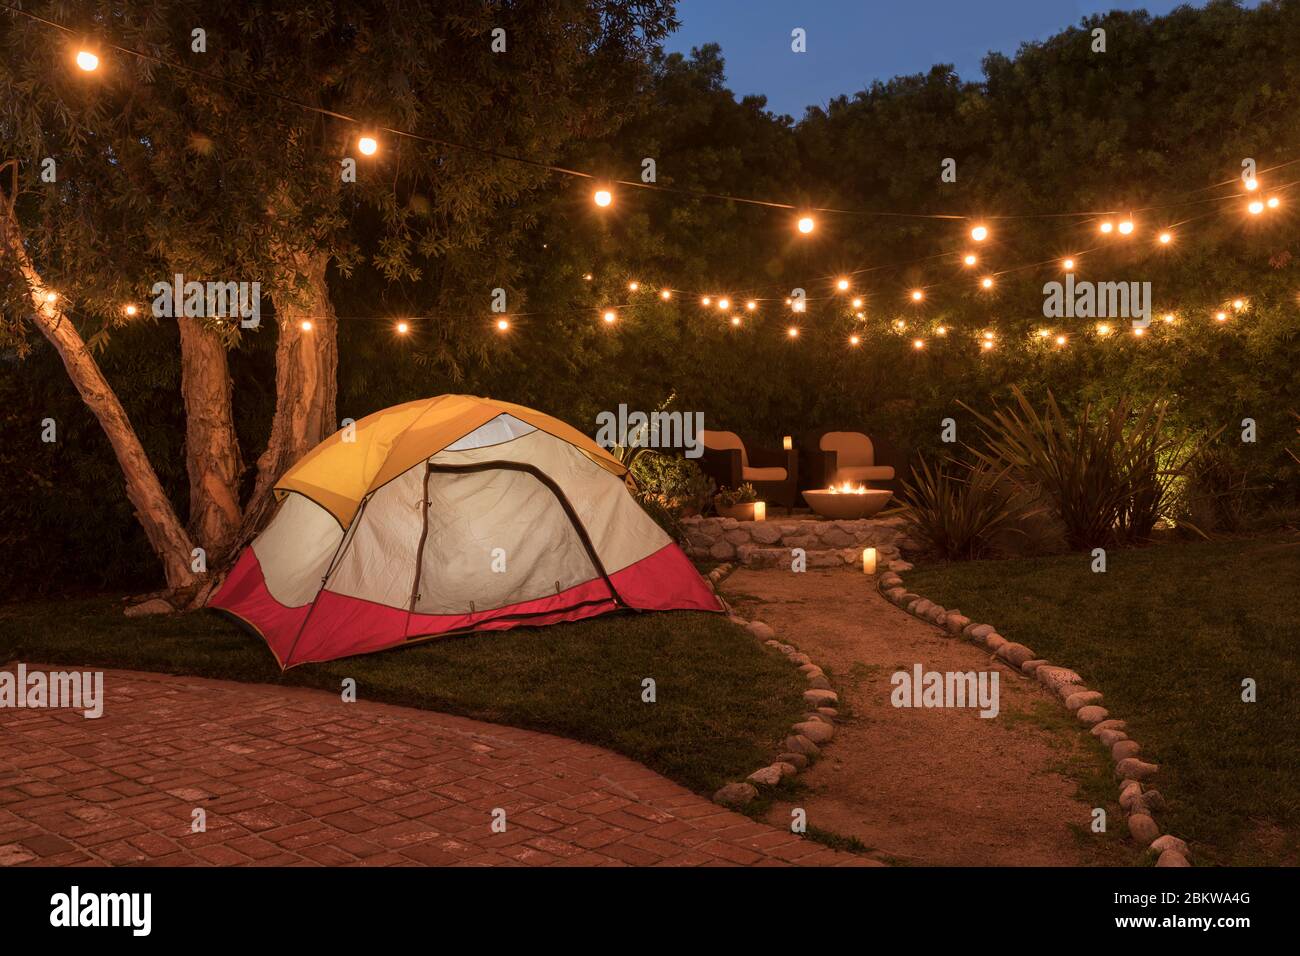 Camping tent in backyard of house at dusk. Stock Photo